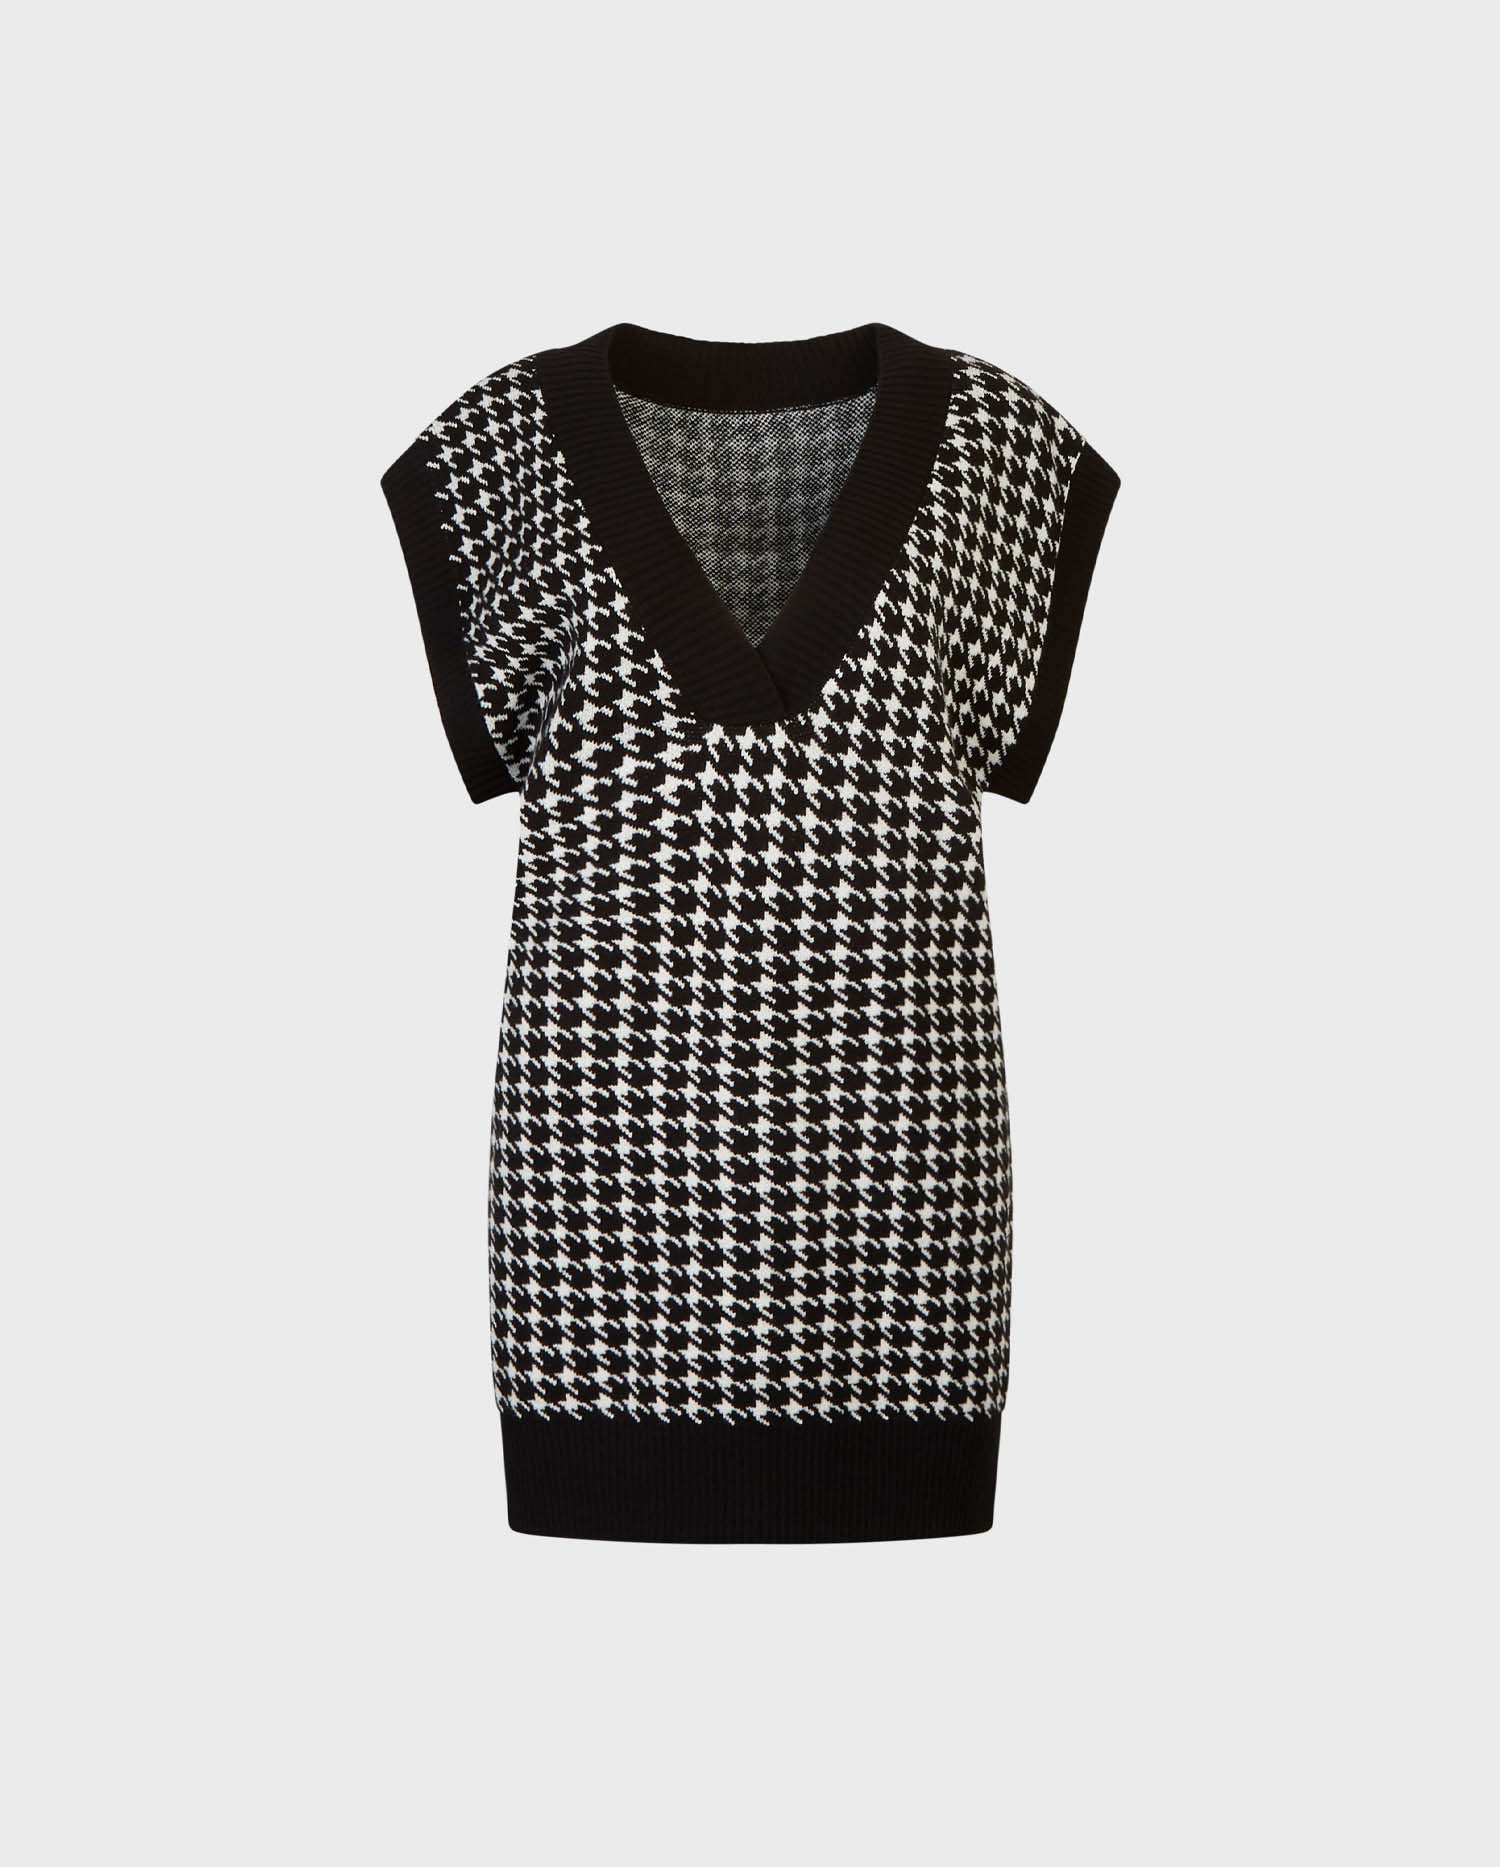 Discover the STENDHAL black and white hound's-tooth sweater vest from ANNE FONTAINE